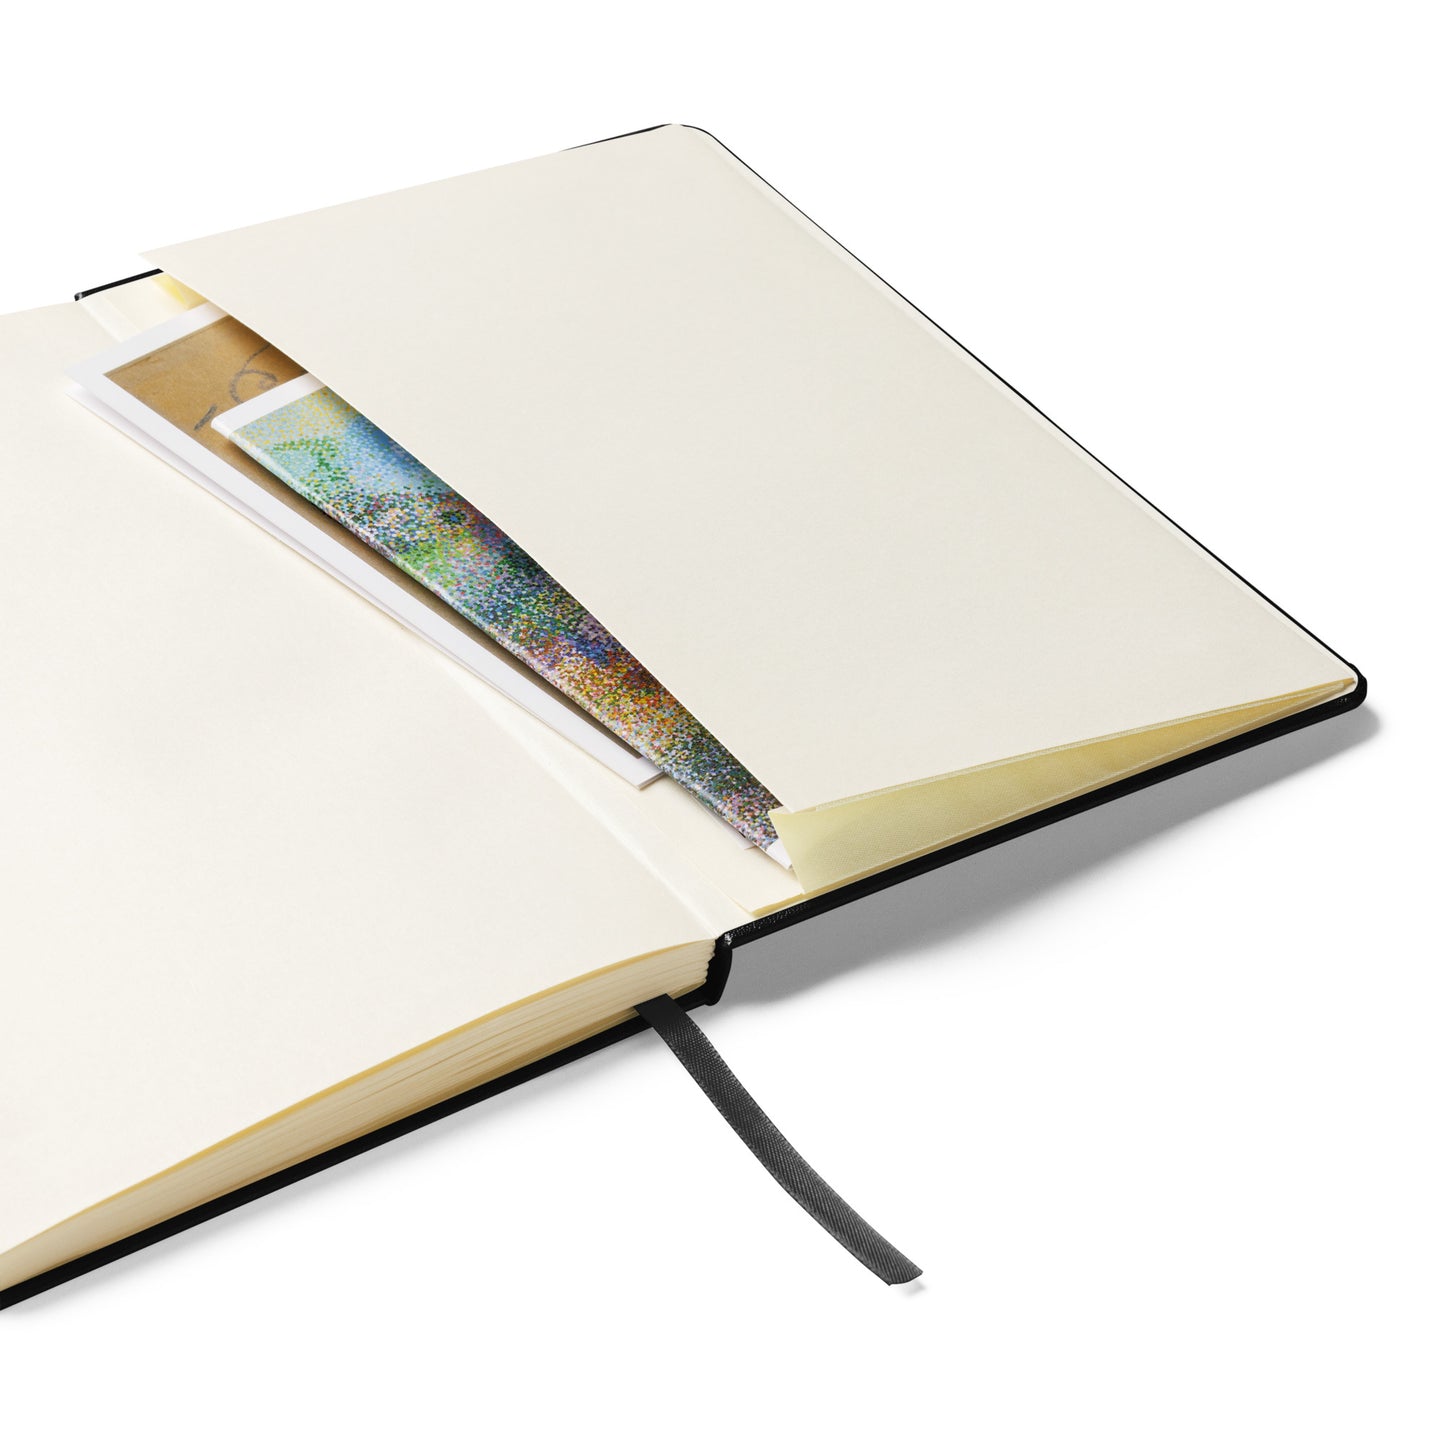 Reputation Takes a Lifetime to Build Hardcover Bound Journal